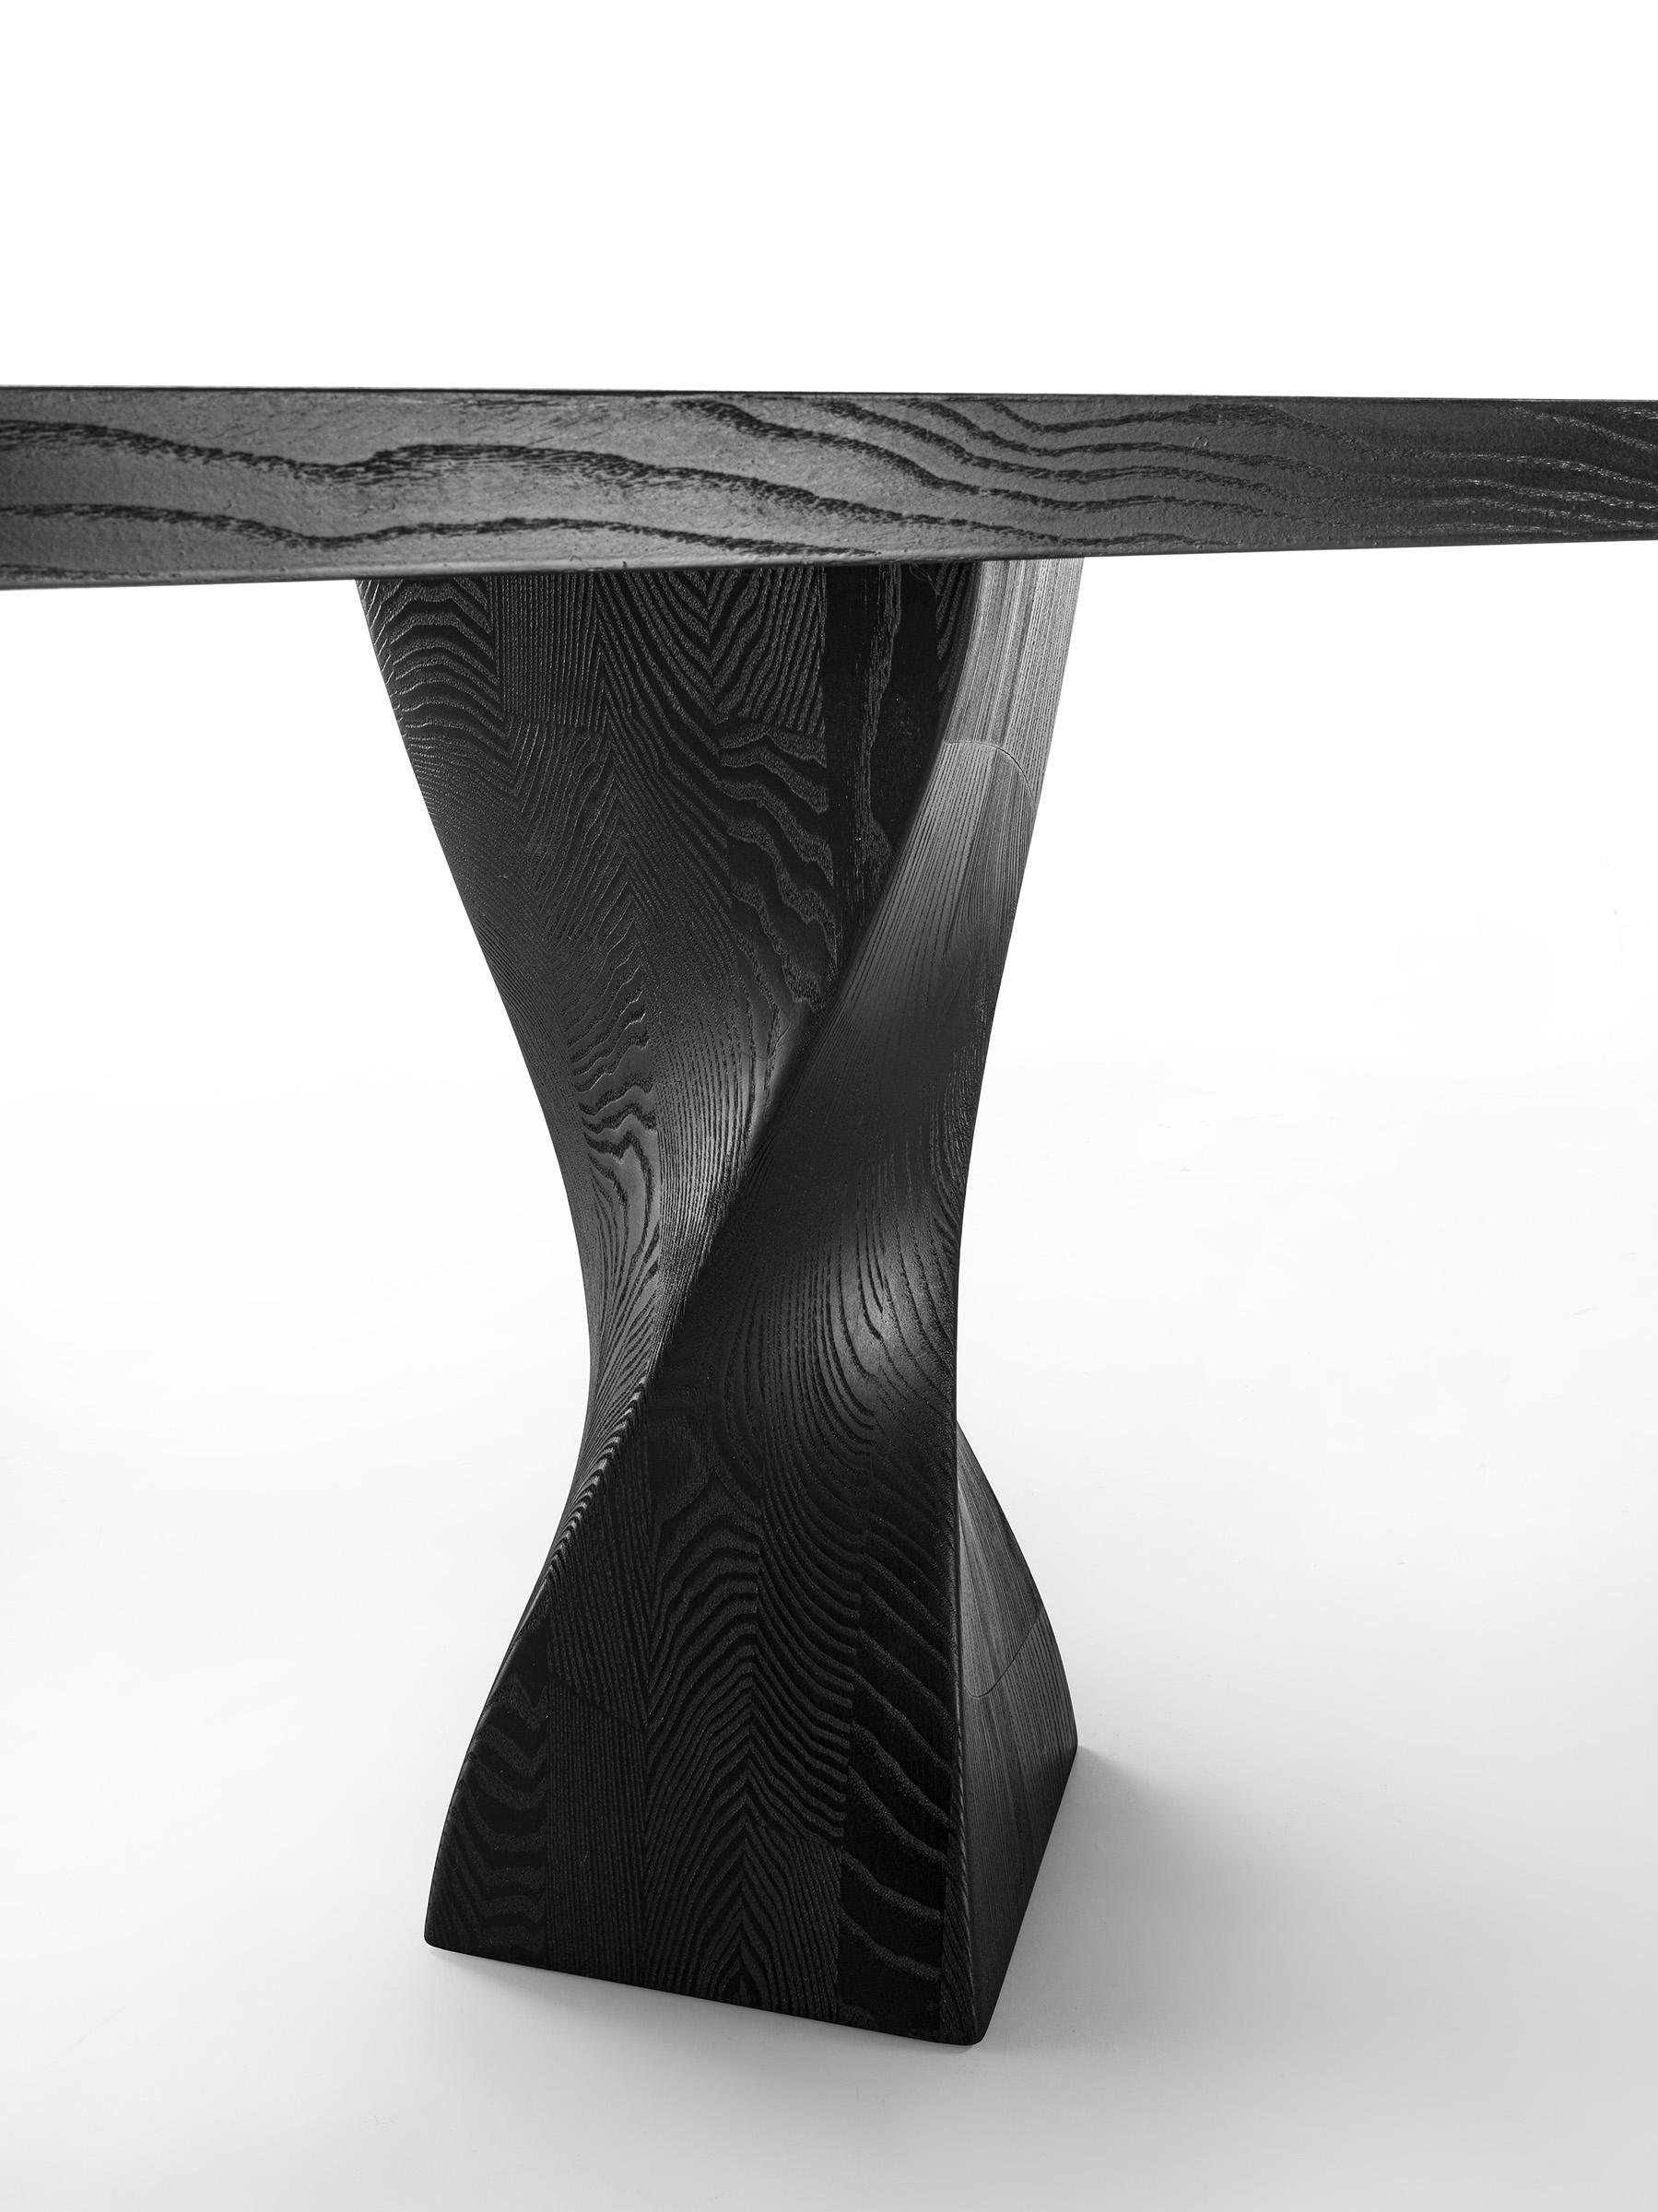 Contemporary Simple Twist Wood Table, Designed by Studio Excalibur, Made in Italy For Sale